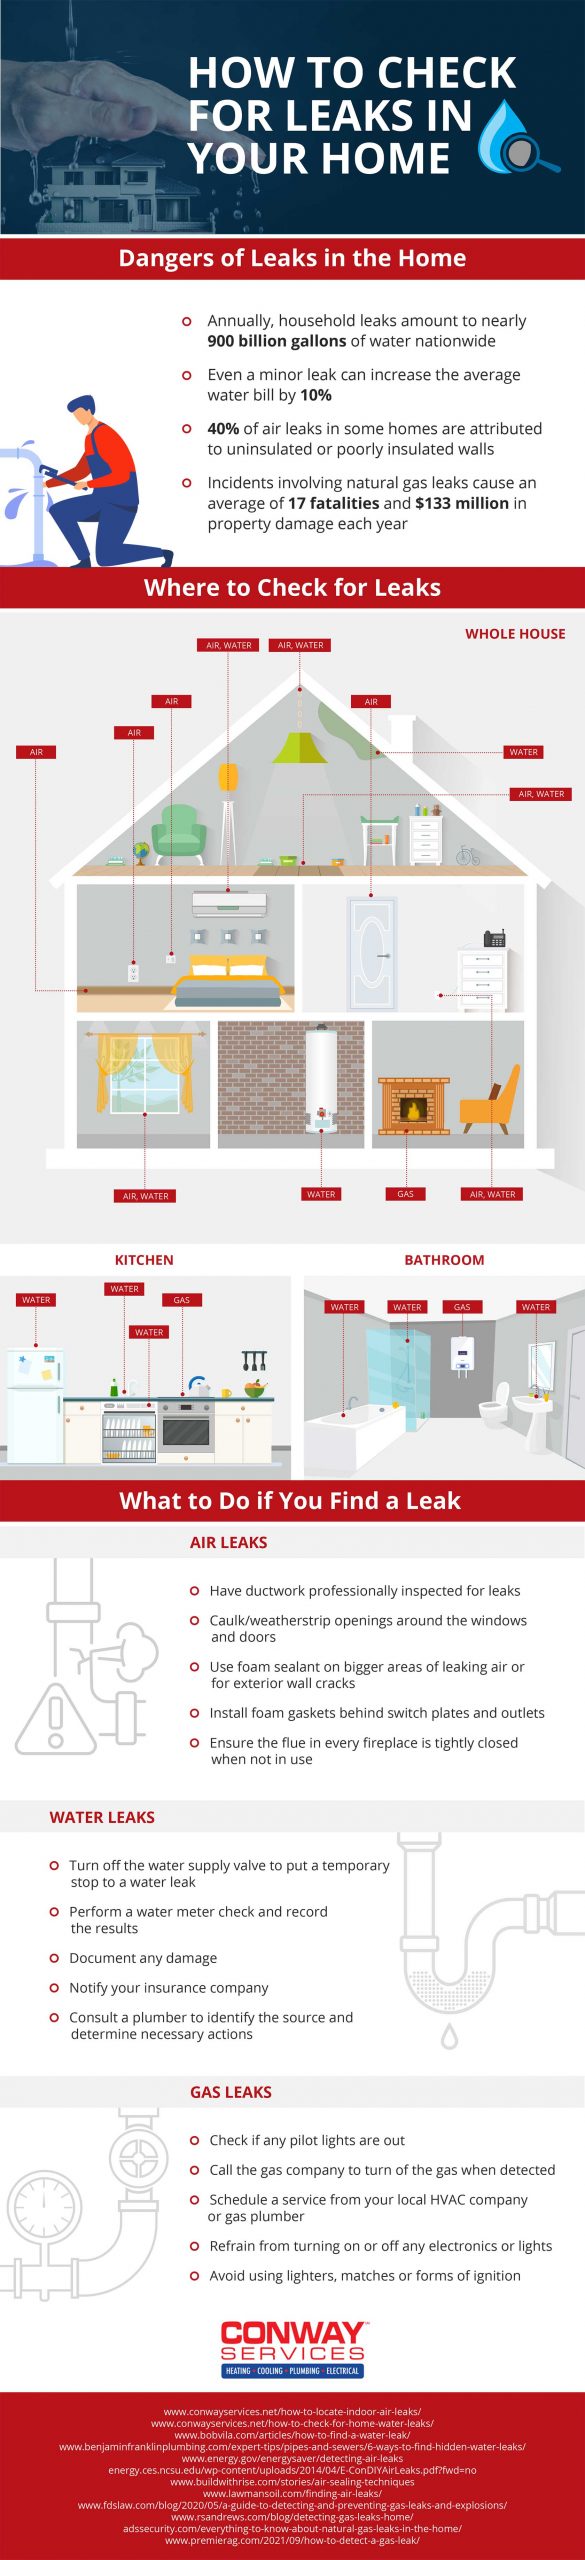 How To Check For Leaks In Your Home - Infographic